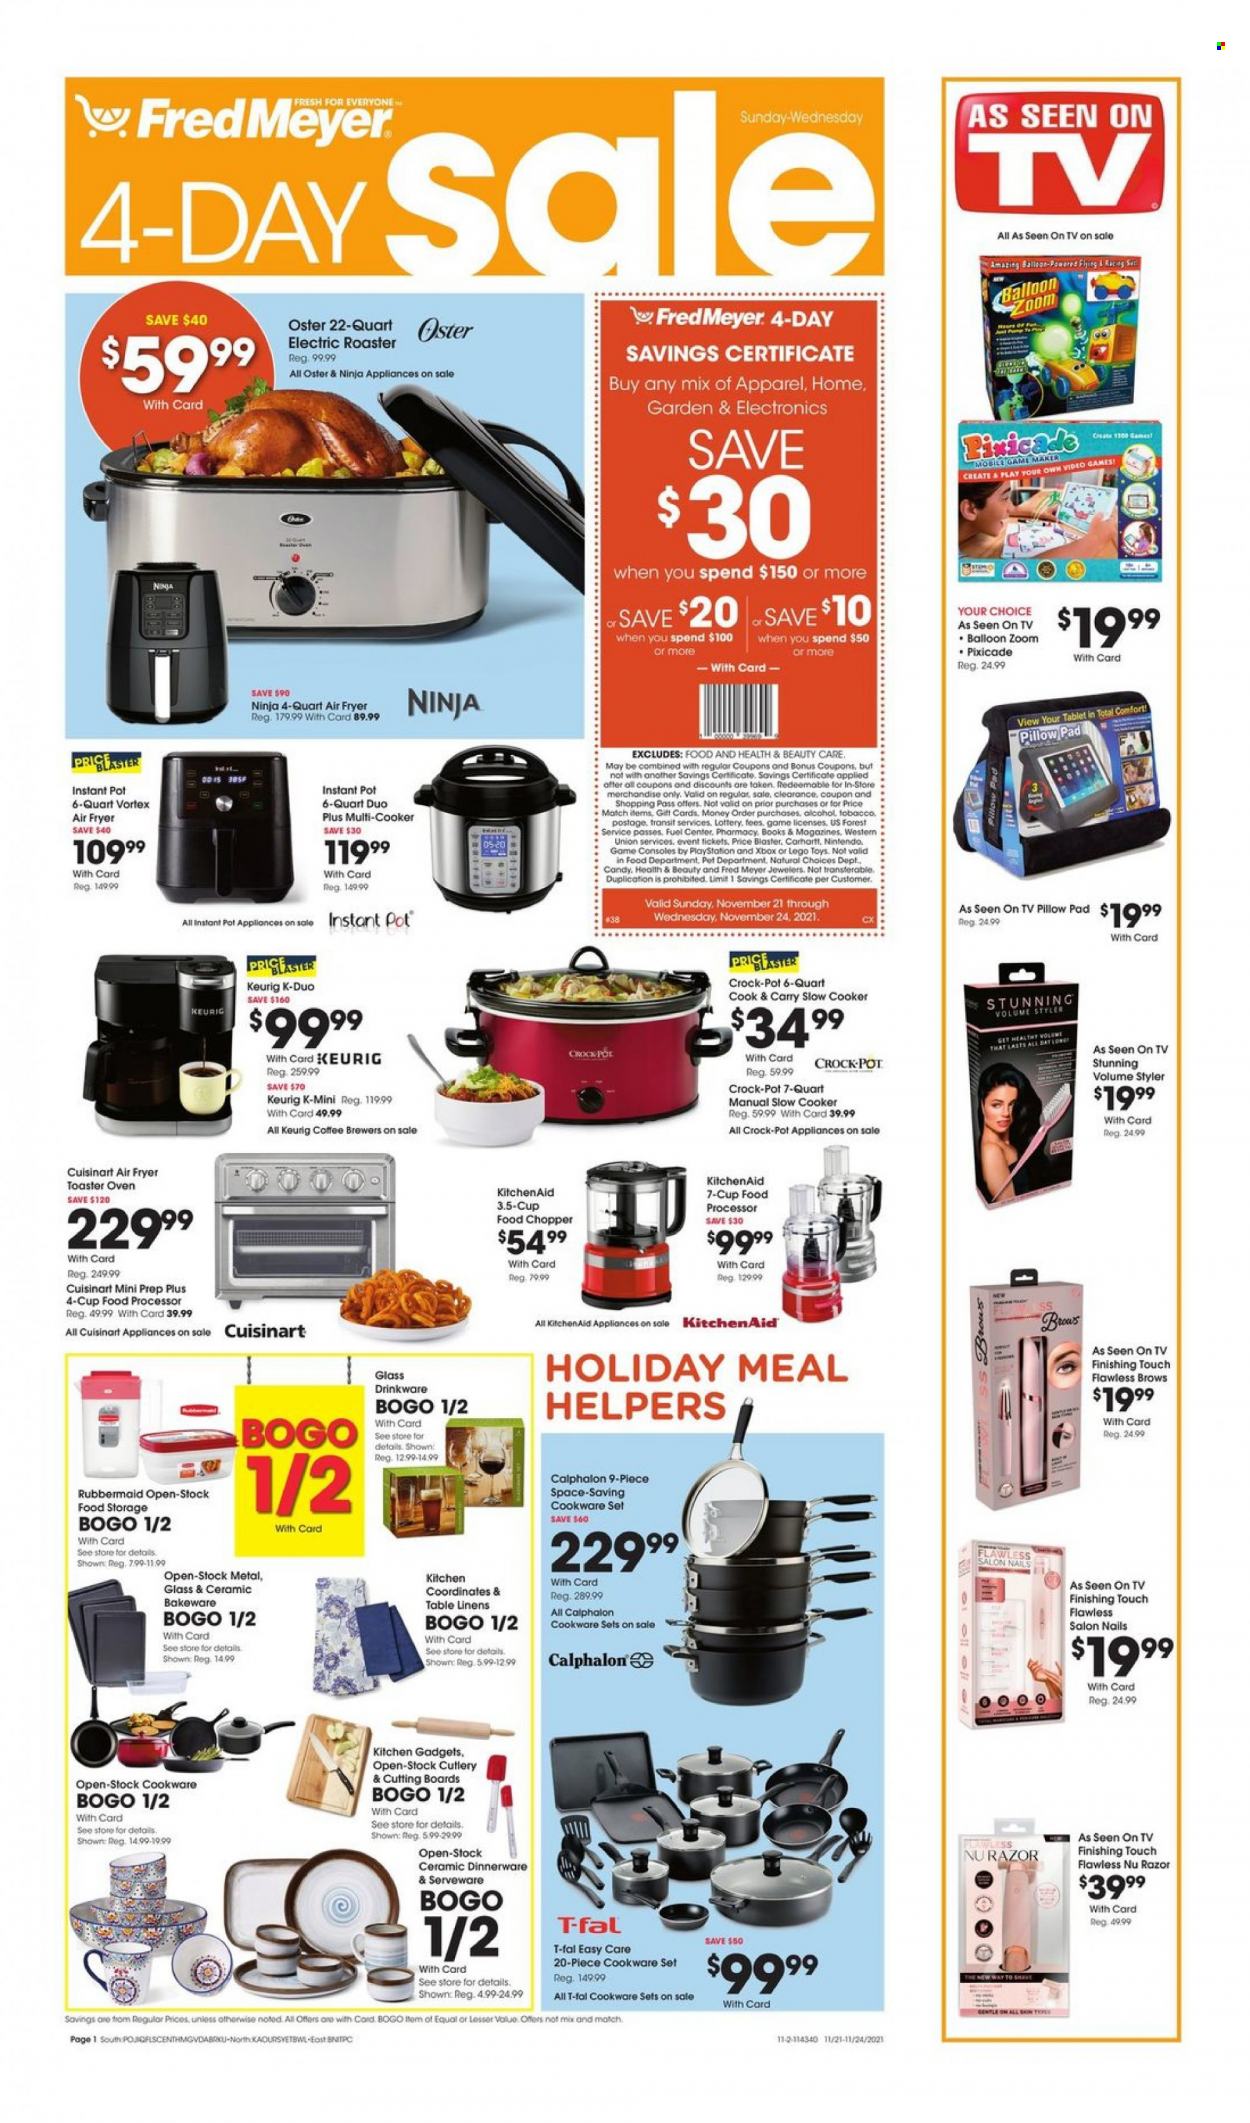 Fred Meyer Flyer - 11/21/2021 - 11/24/2021 - Sales products - tablet, brewer, coffee, Keurig, alcohol, Razor, bin, cookware set, dinnerware set, drinkware, KitchenAid, pot, handy chopper, serveware, bakeware, Cuisinart, balloons, book, linens, pillow, PlayStation, Xbox, multifunction cooker, slow cooker, air fryer, Instant Pot, food processor, CrockPot, roaster, table, LEGO, toys. Page 1.